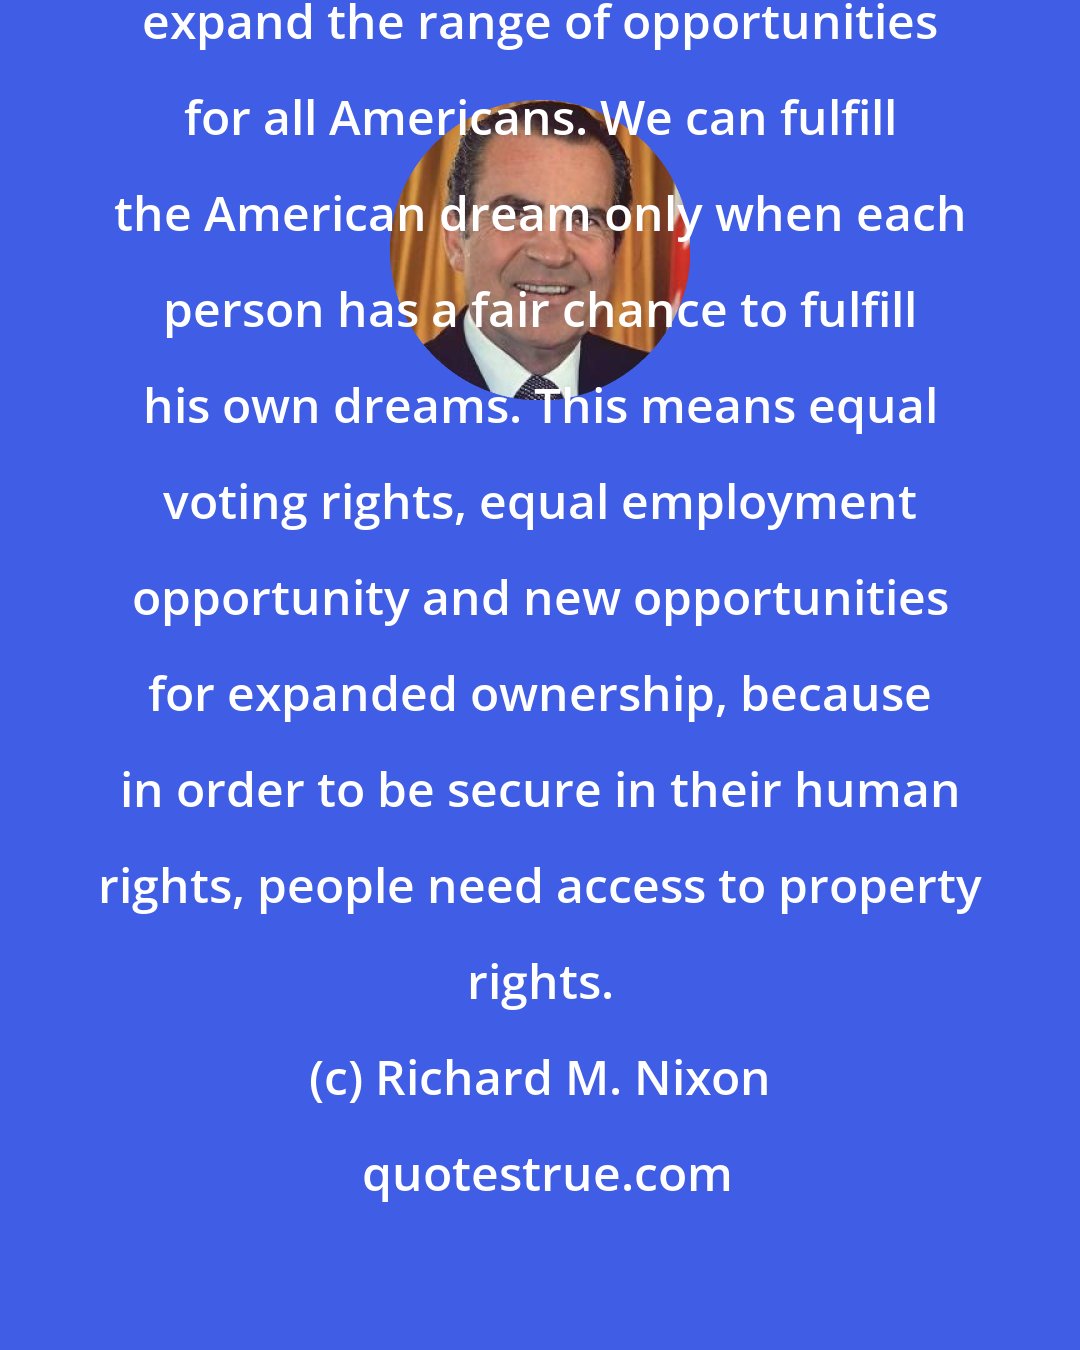 Richard M. Nixon: We must adopt reforms which will expand the range of opportunities for all Americans. We can fulfill the American dream only when each person has a fair chance to fulfill his own dreams. This means equal voting rights, equal employment opportunity and new opportunities for expanded ownership, because in order to be secure in their human rights, people need access to property rights.